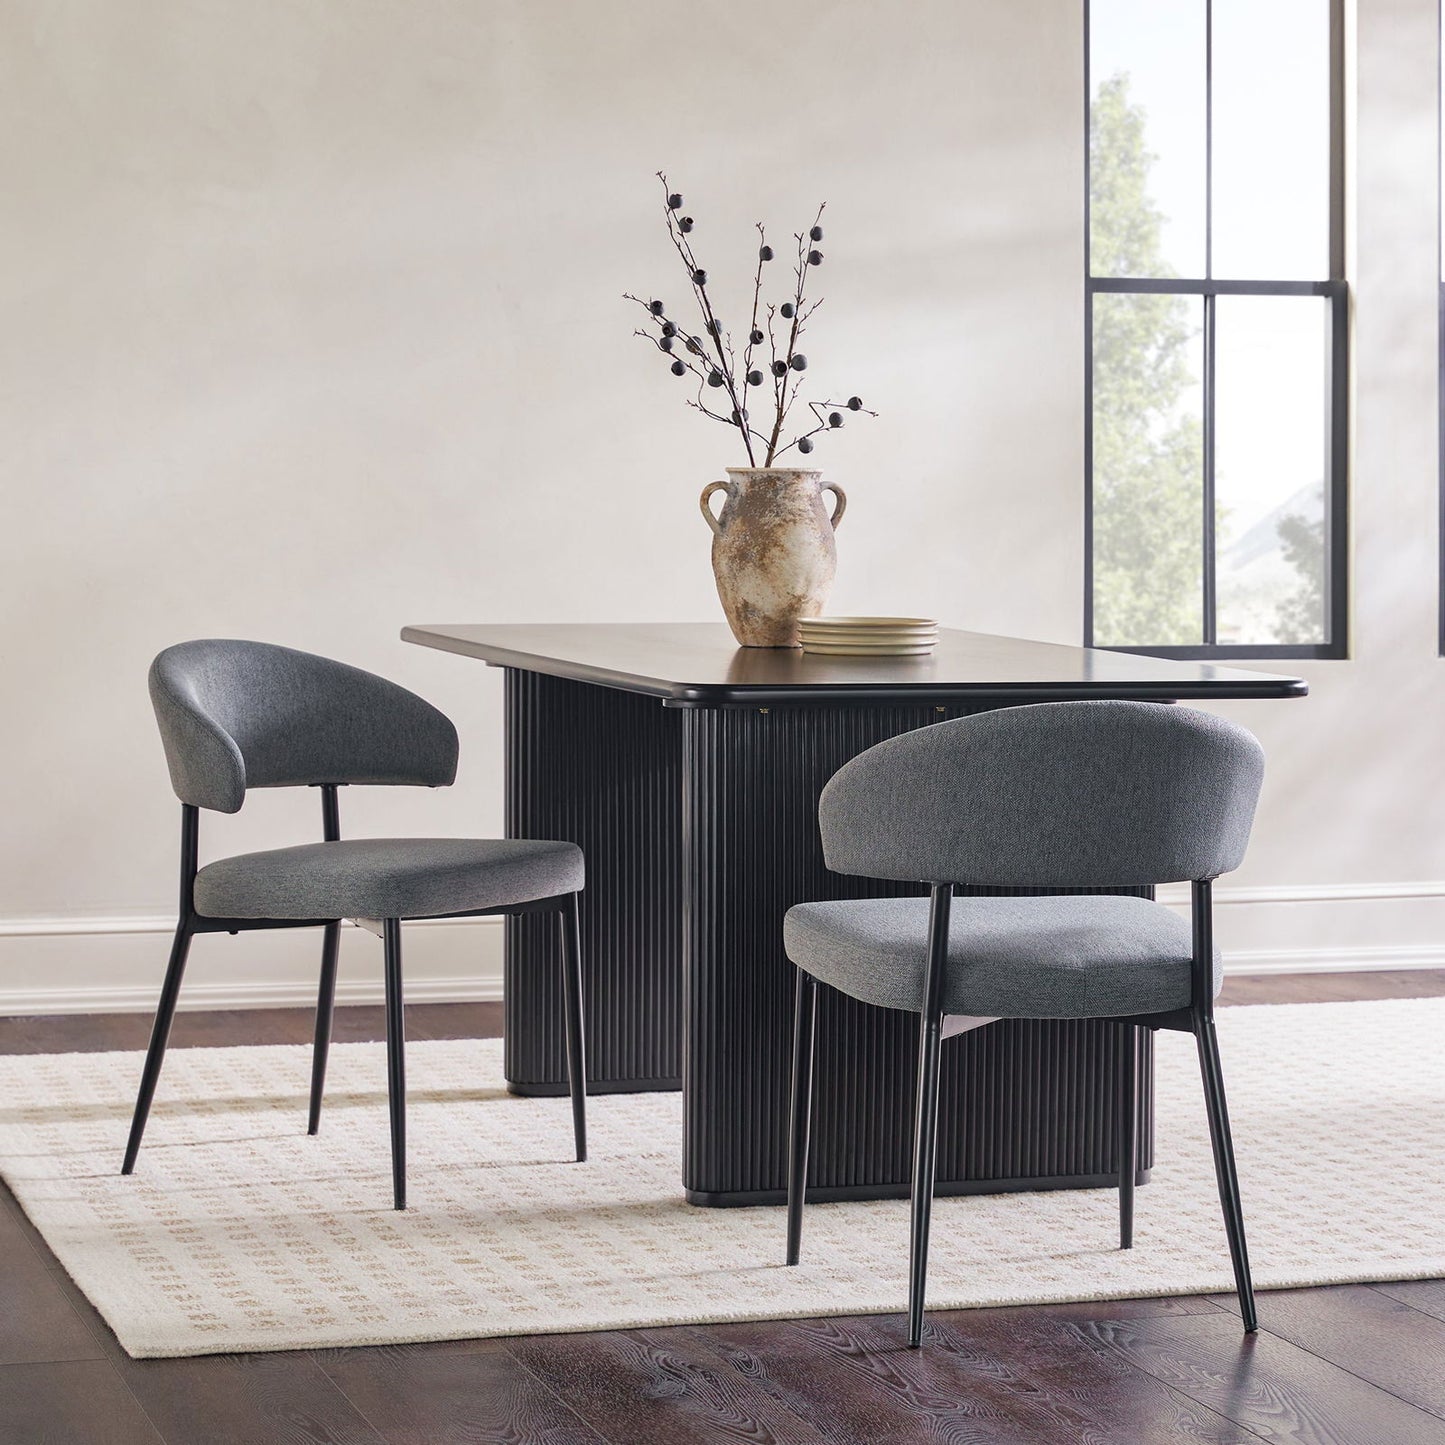 Alexis Modern Curved Back Upholstered Dining Chair, set of 2 - Mac & Mabel